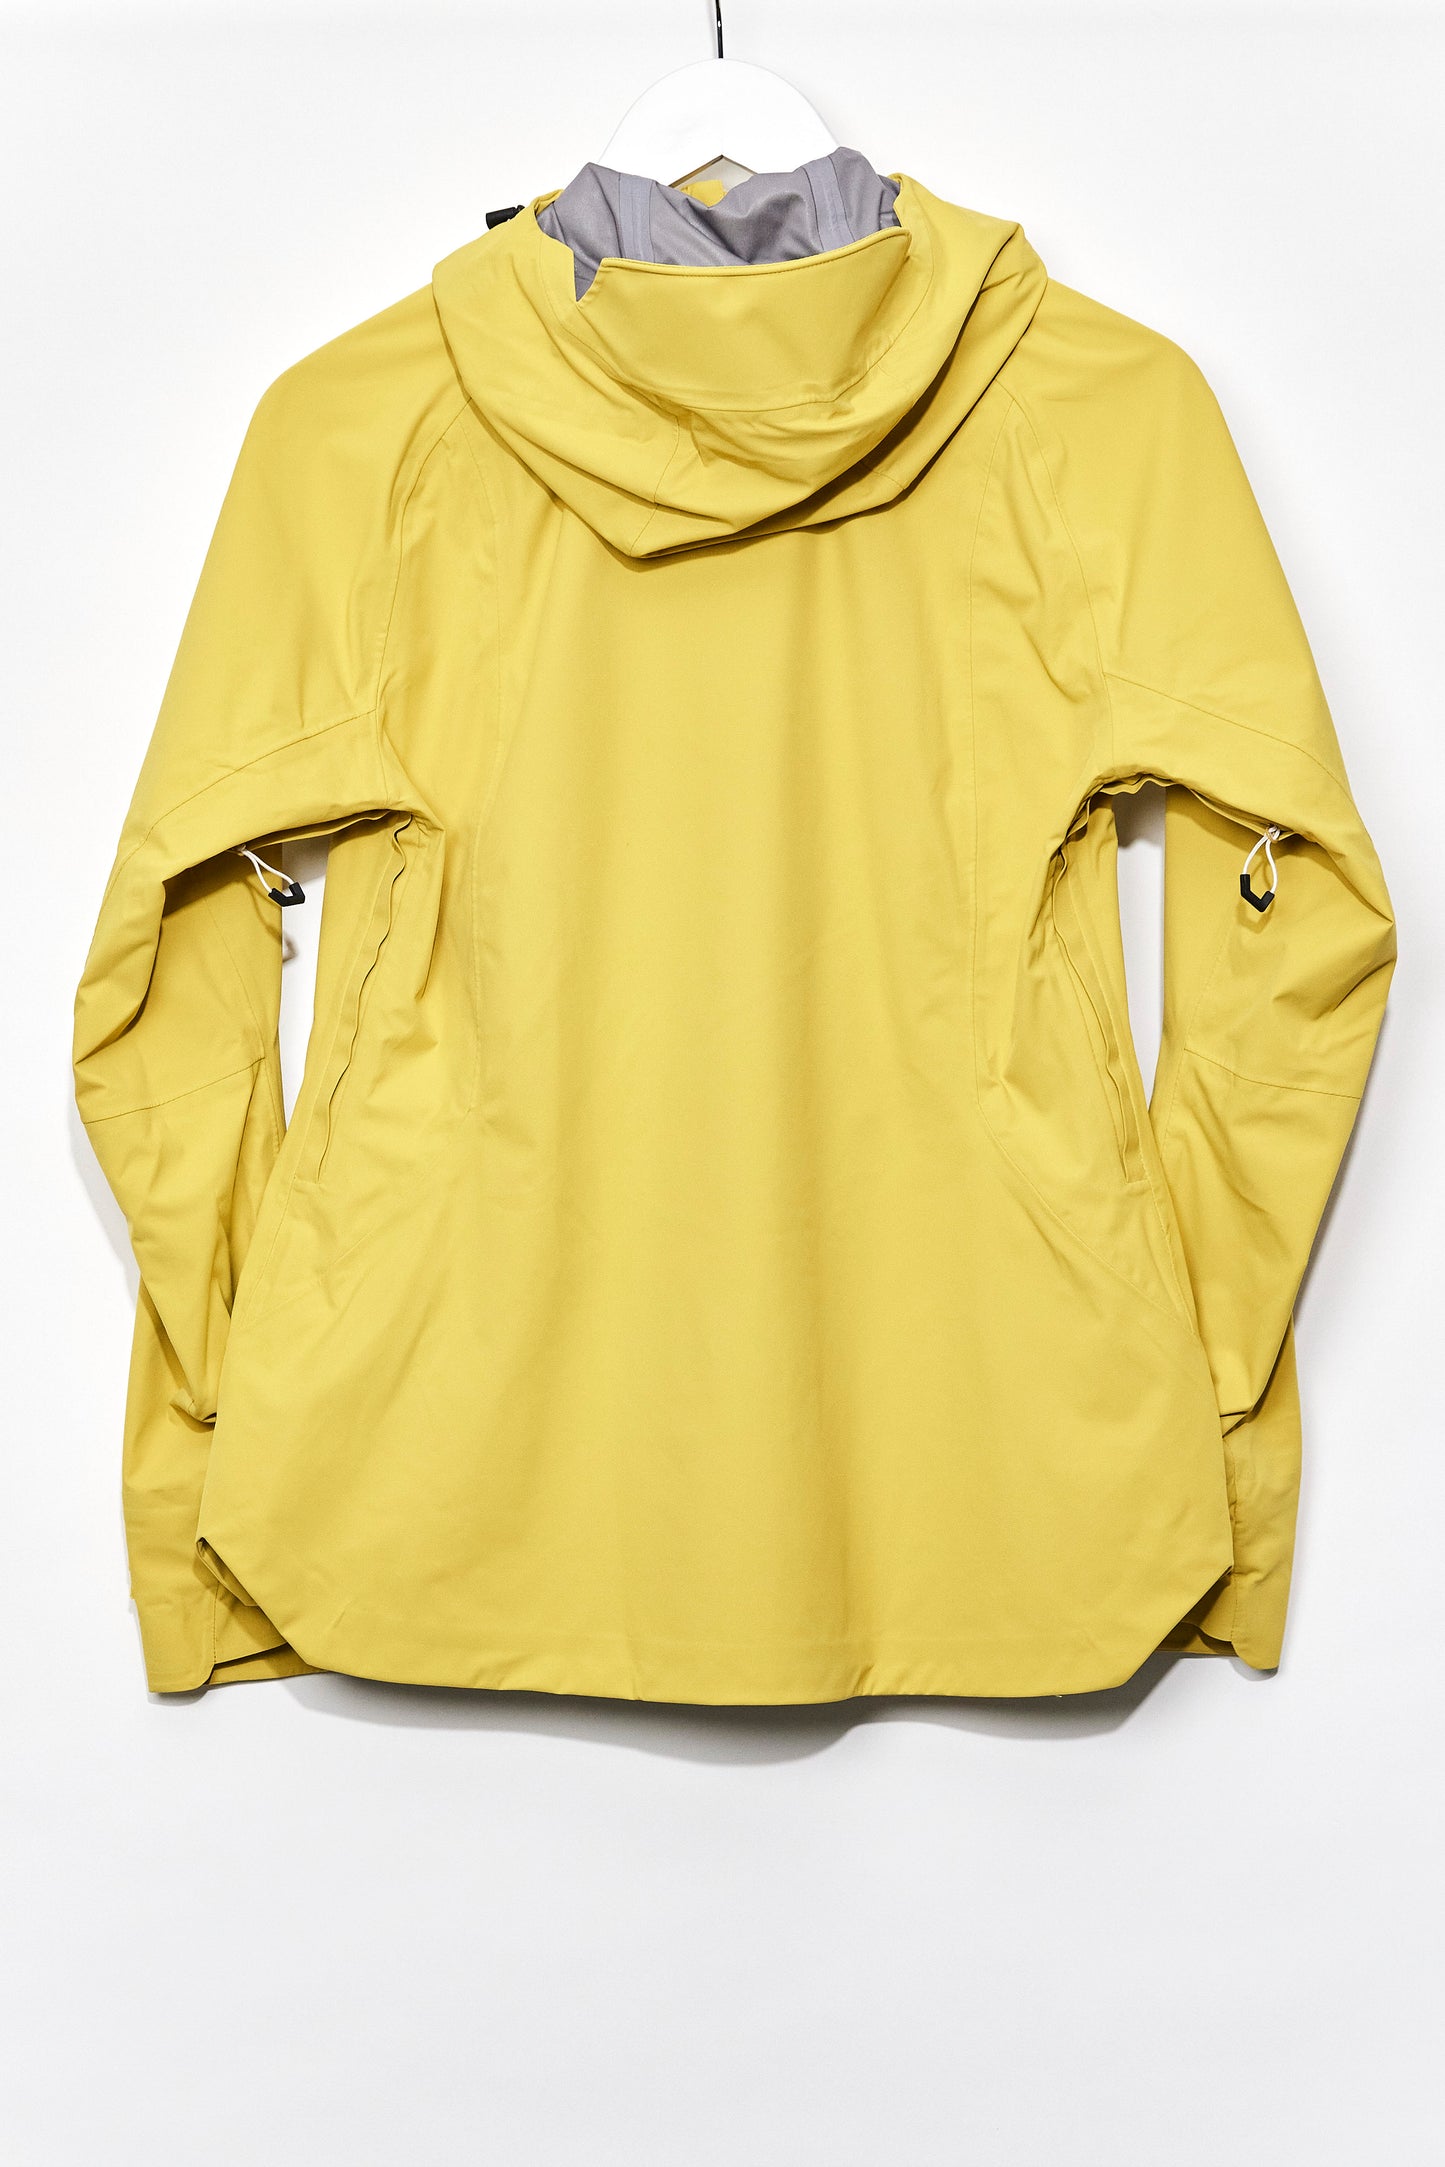 Womens Quechua Yellow raincoat size extra small